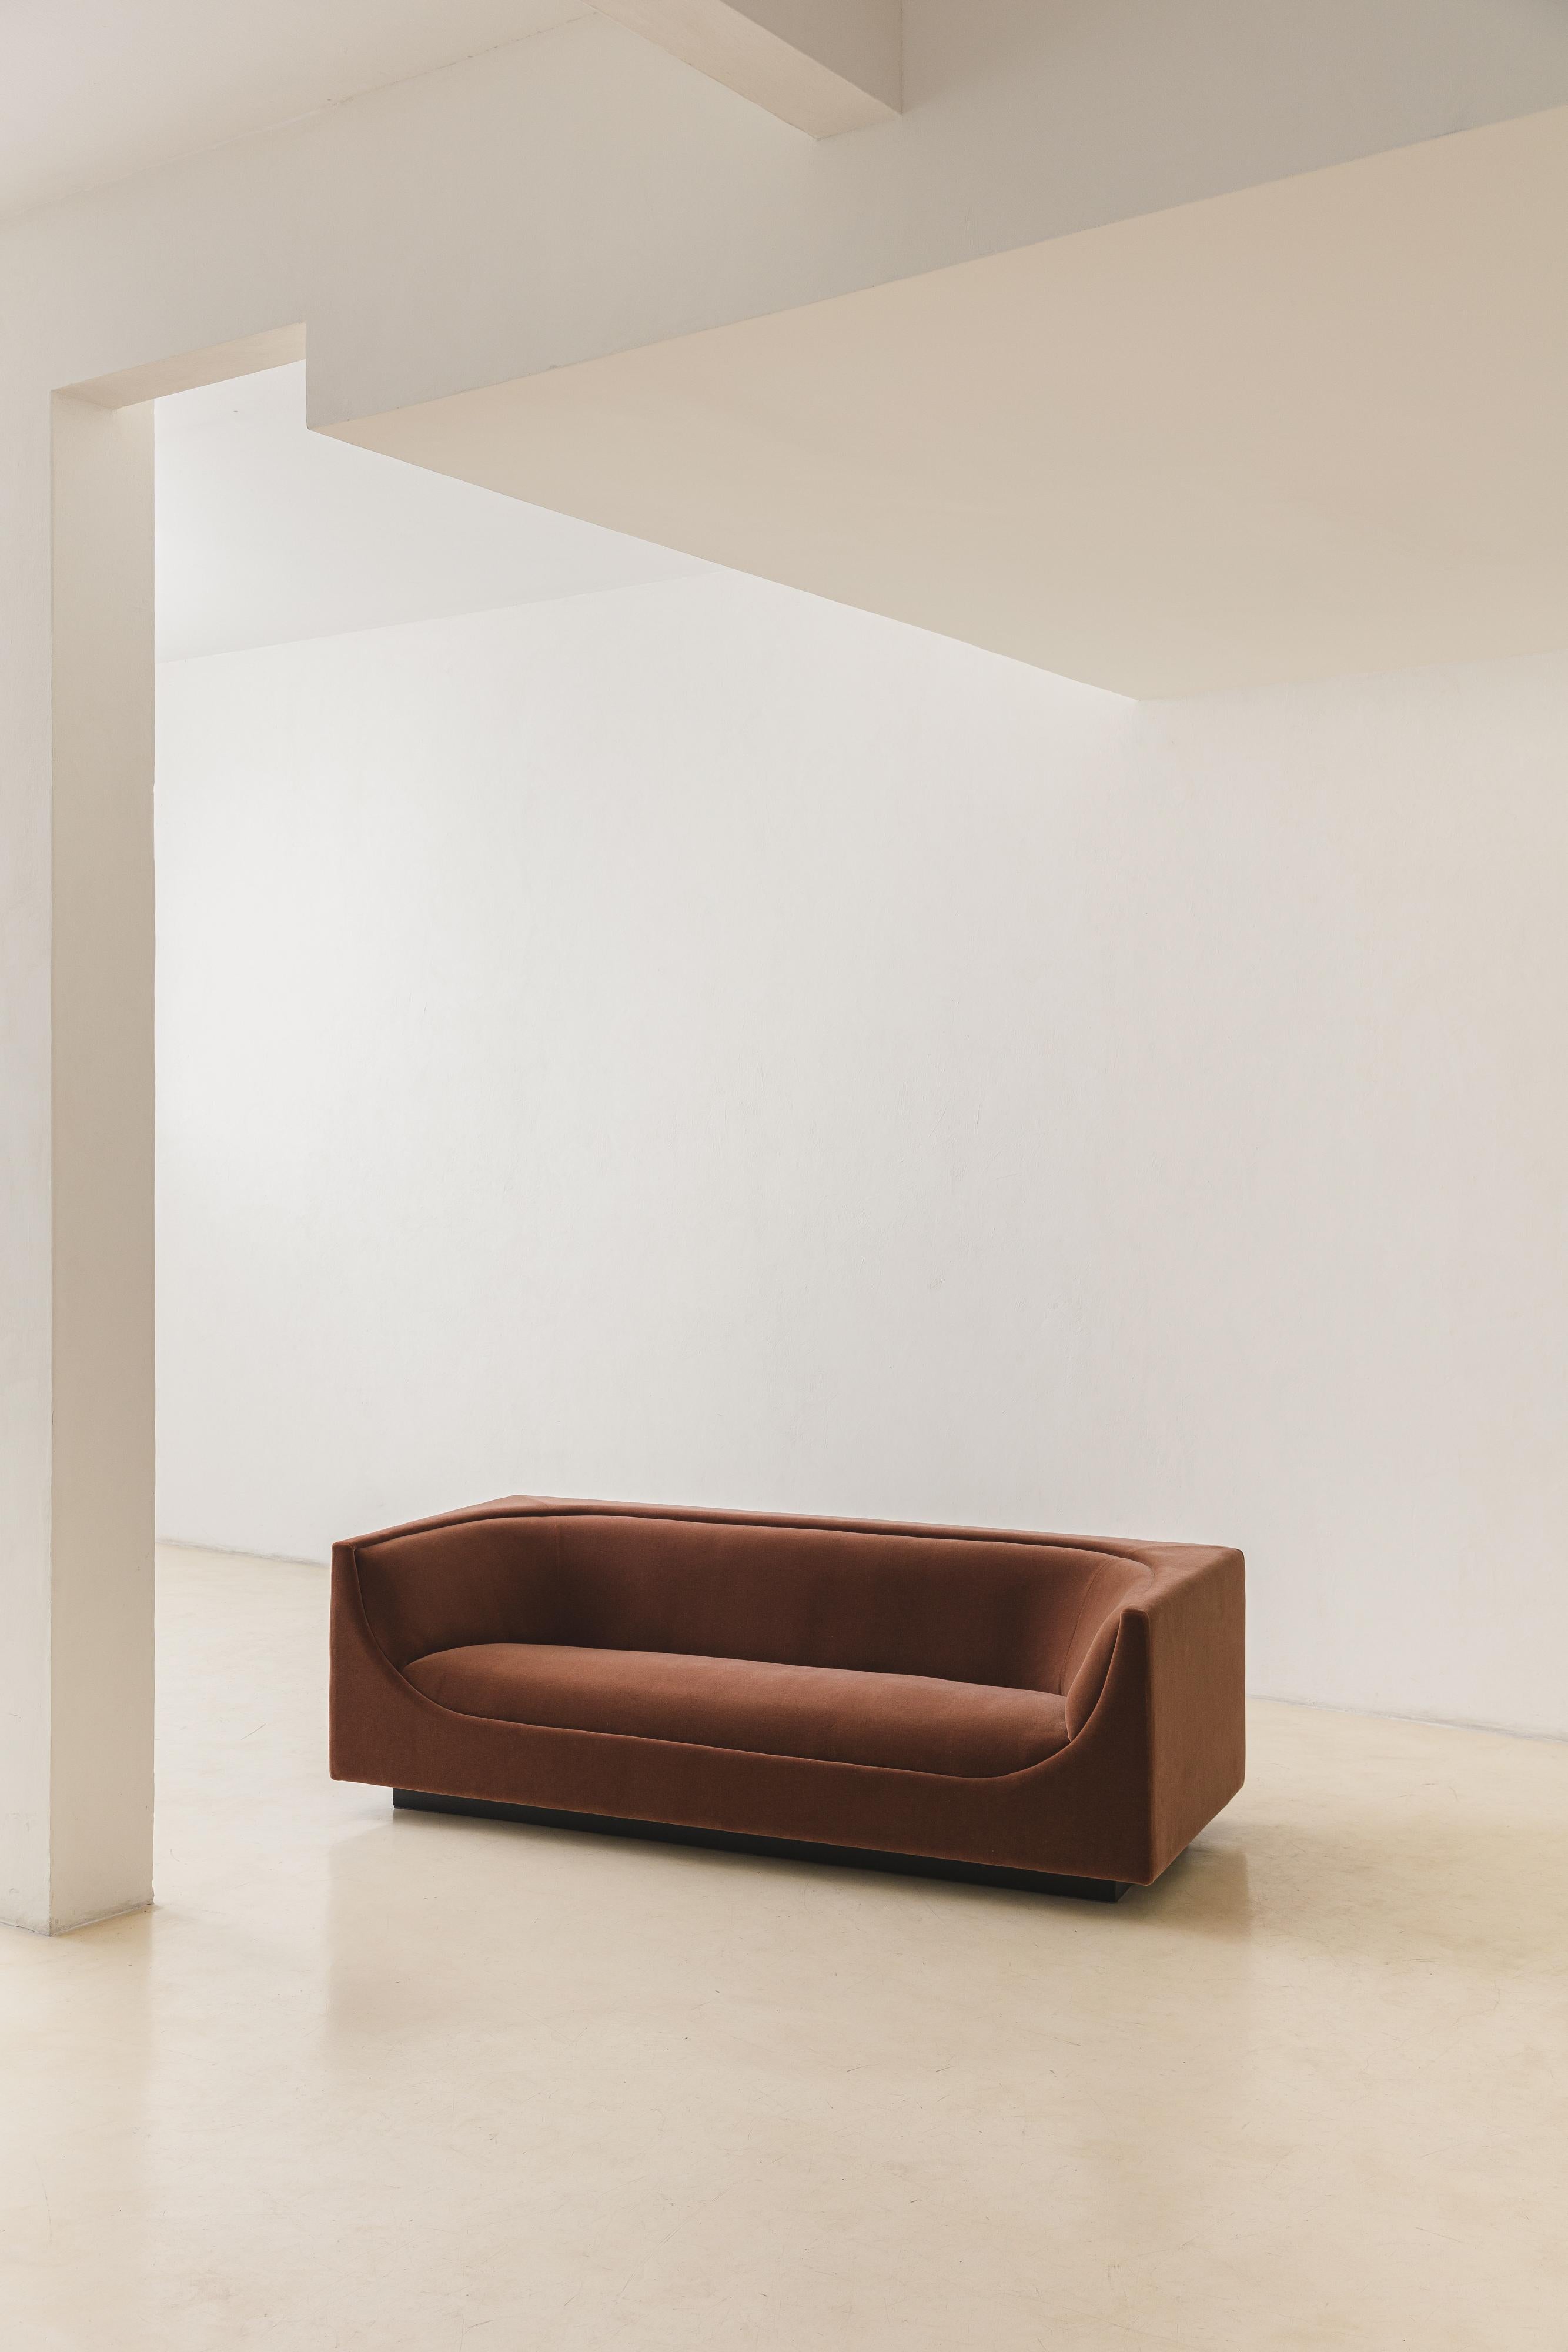 This recently upholstered cubo (Cube) sofa was designed by Jorge Zalszupin (1922-2020) in the 1970s. 
The elegance, a feature of Zalszupin designs, on this piece does not come from sculpted wood details or the delicacy and lightness of curves, but